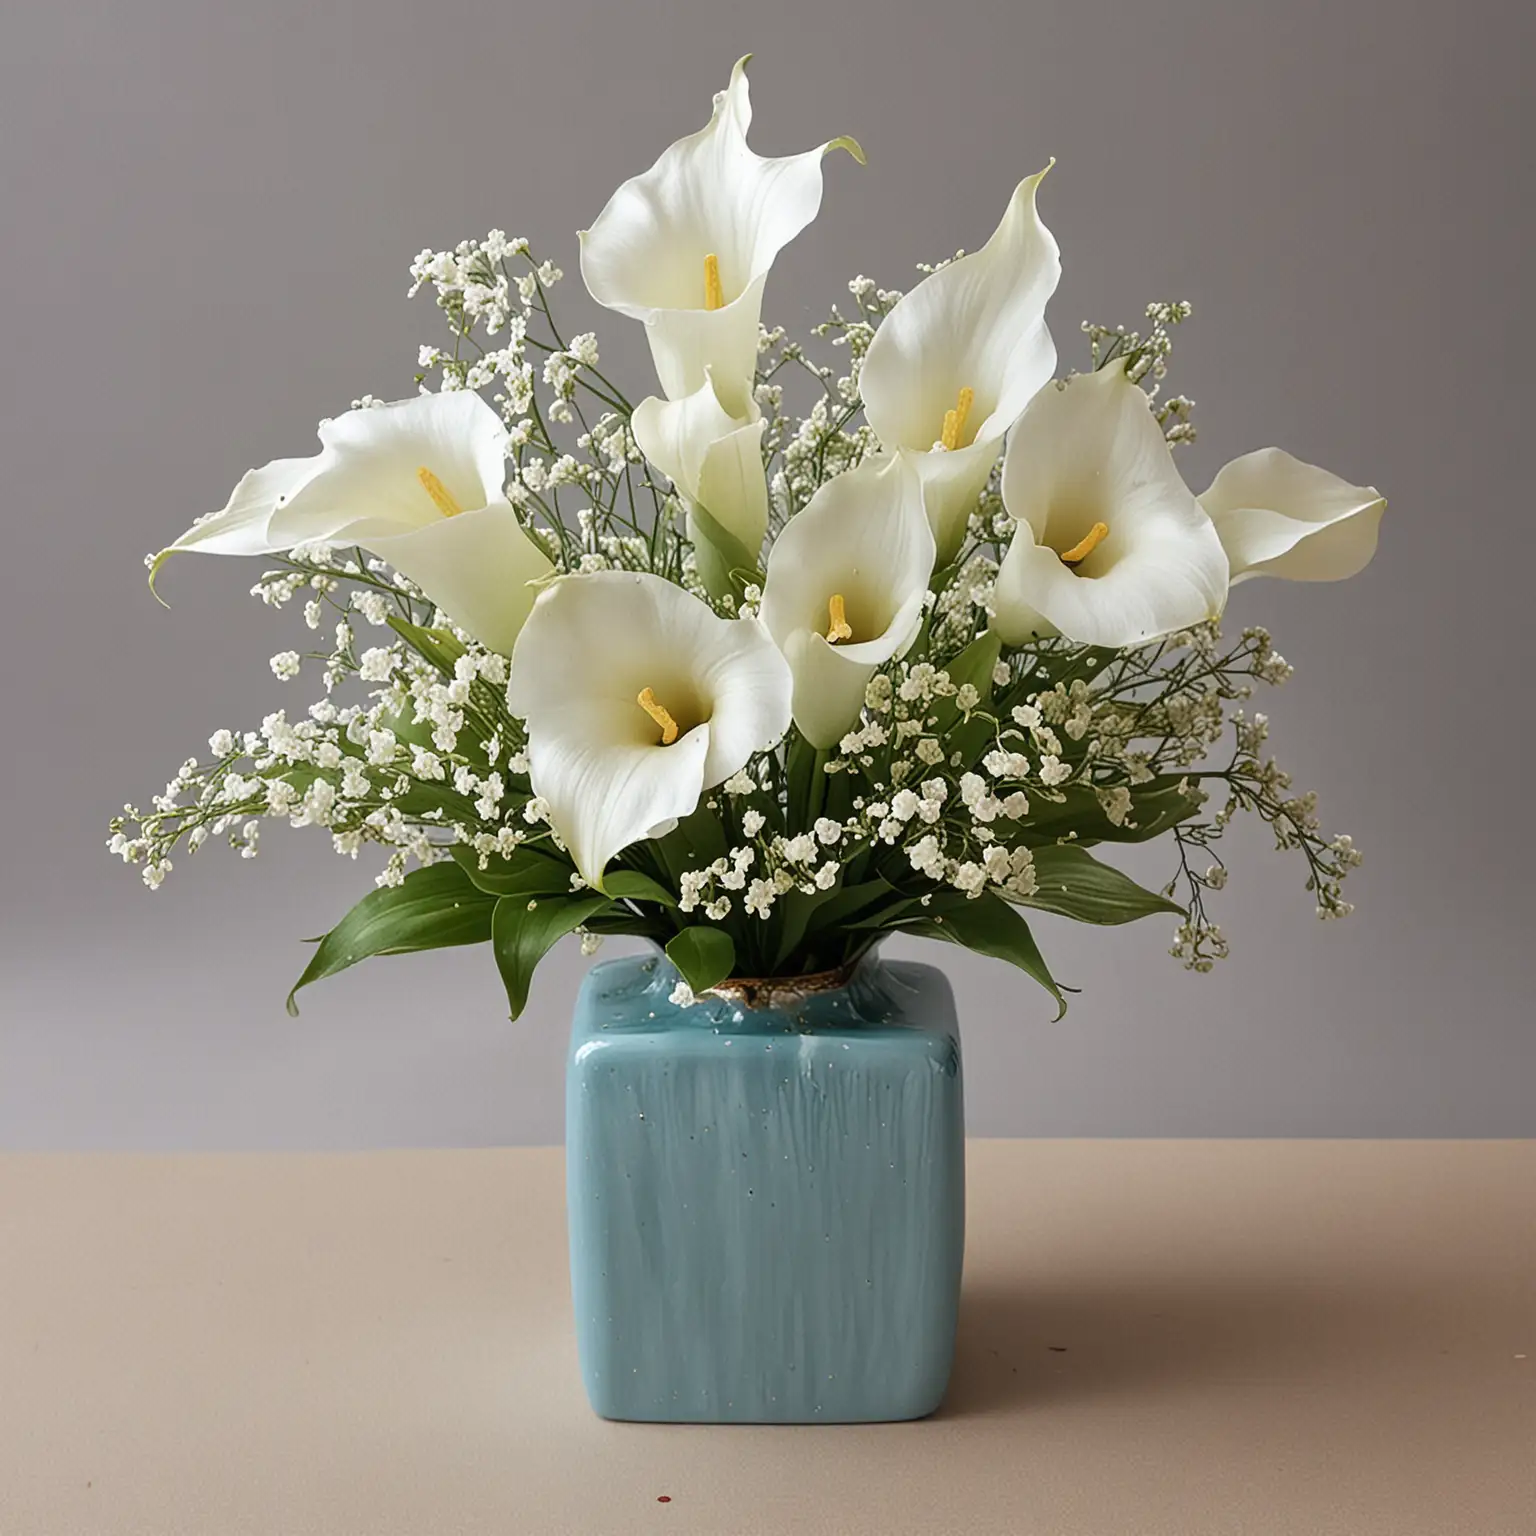 ice blue square ceramic vase with calla lilies and baby's breath